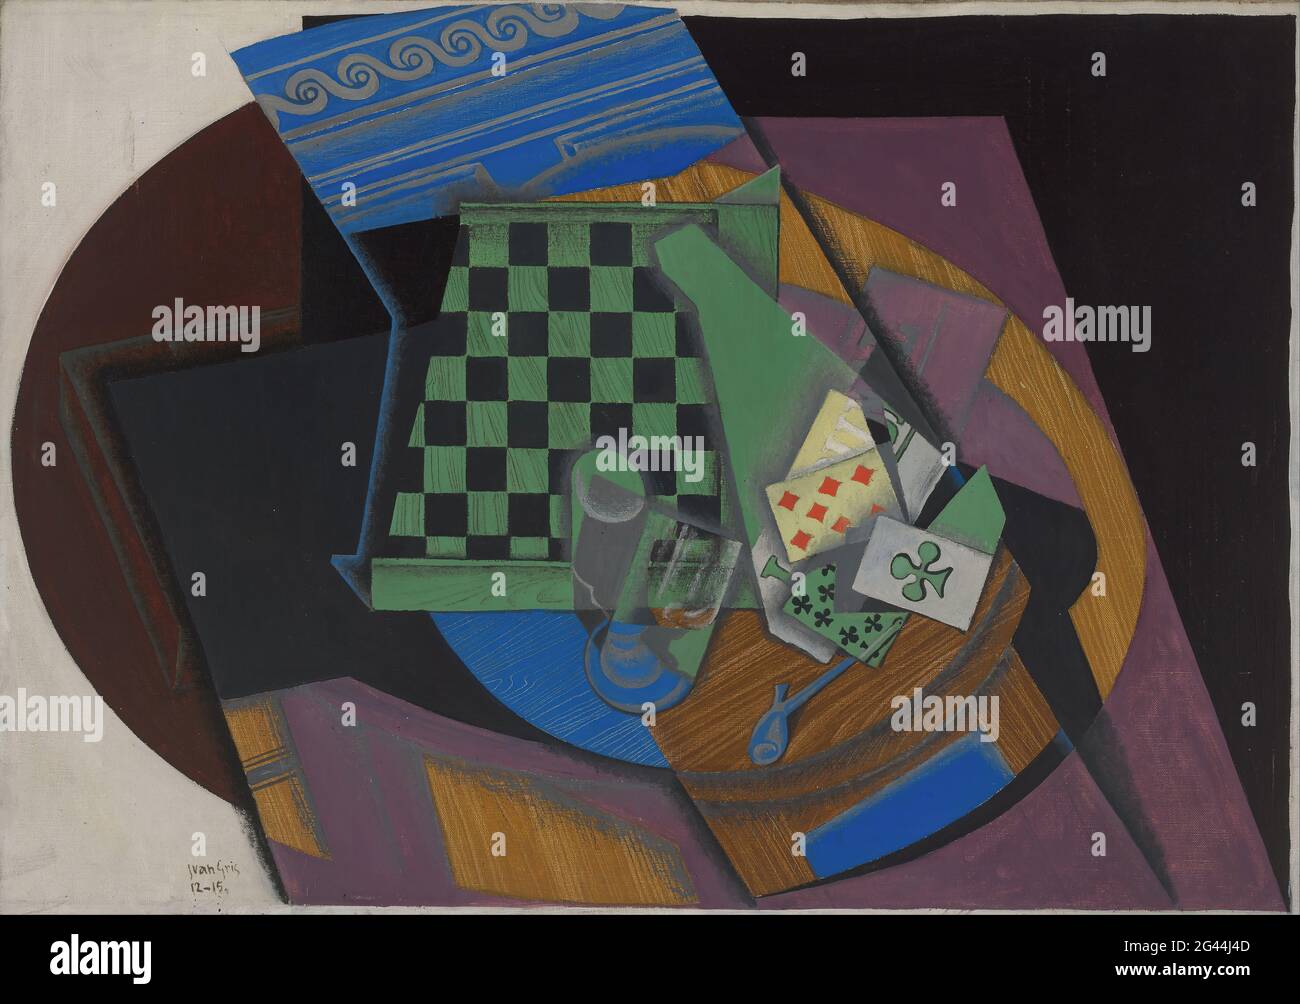 Juan Gris - Damier et cartes Ã  jouer (Checkerboard and playing cards) Stock Photo